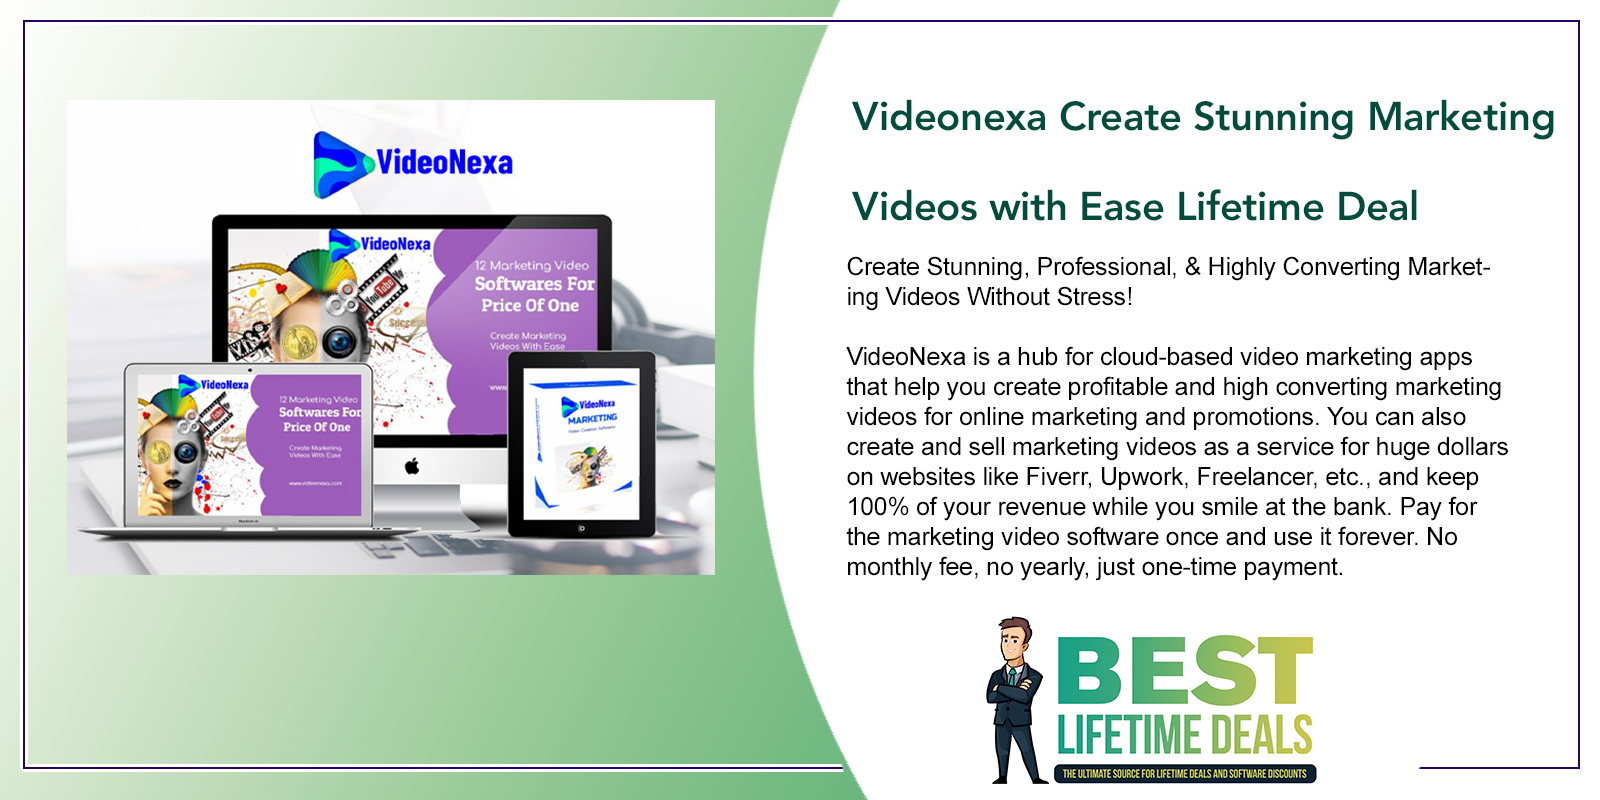 Videonexa Create Stunning Marketing Videos with Ease Lifetime Deal Featured Image